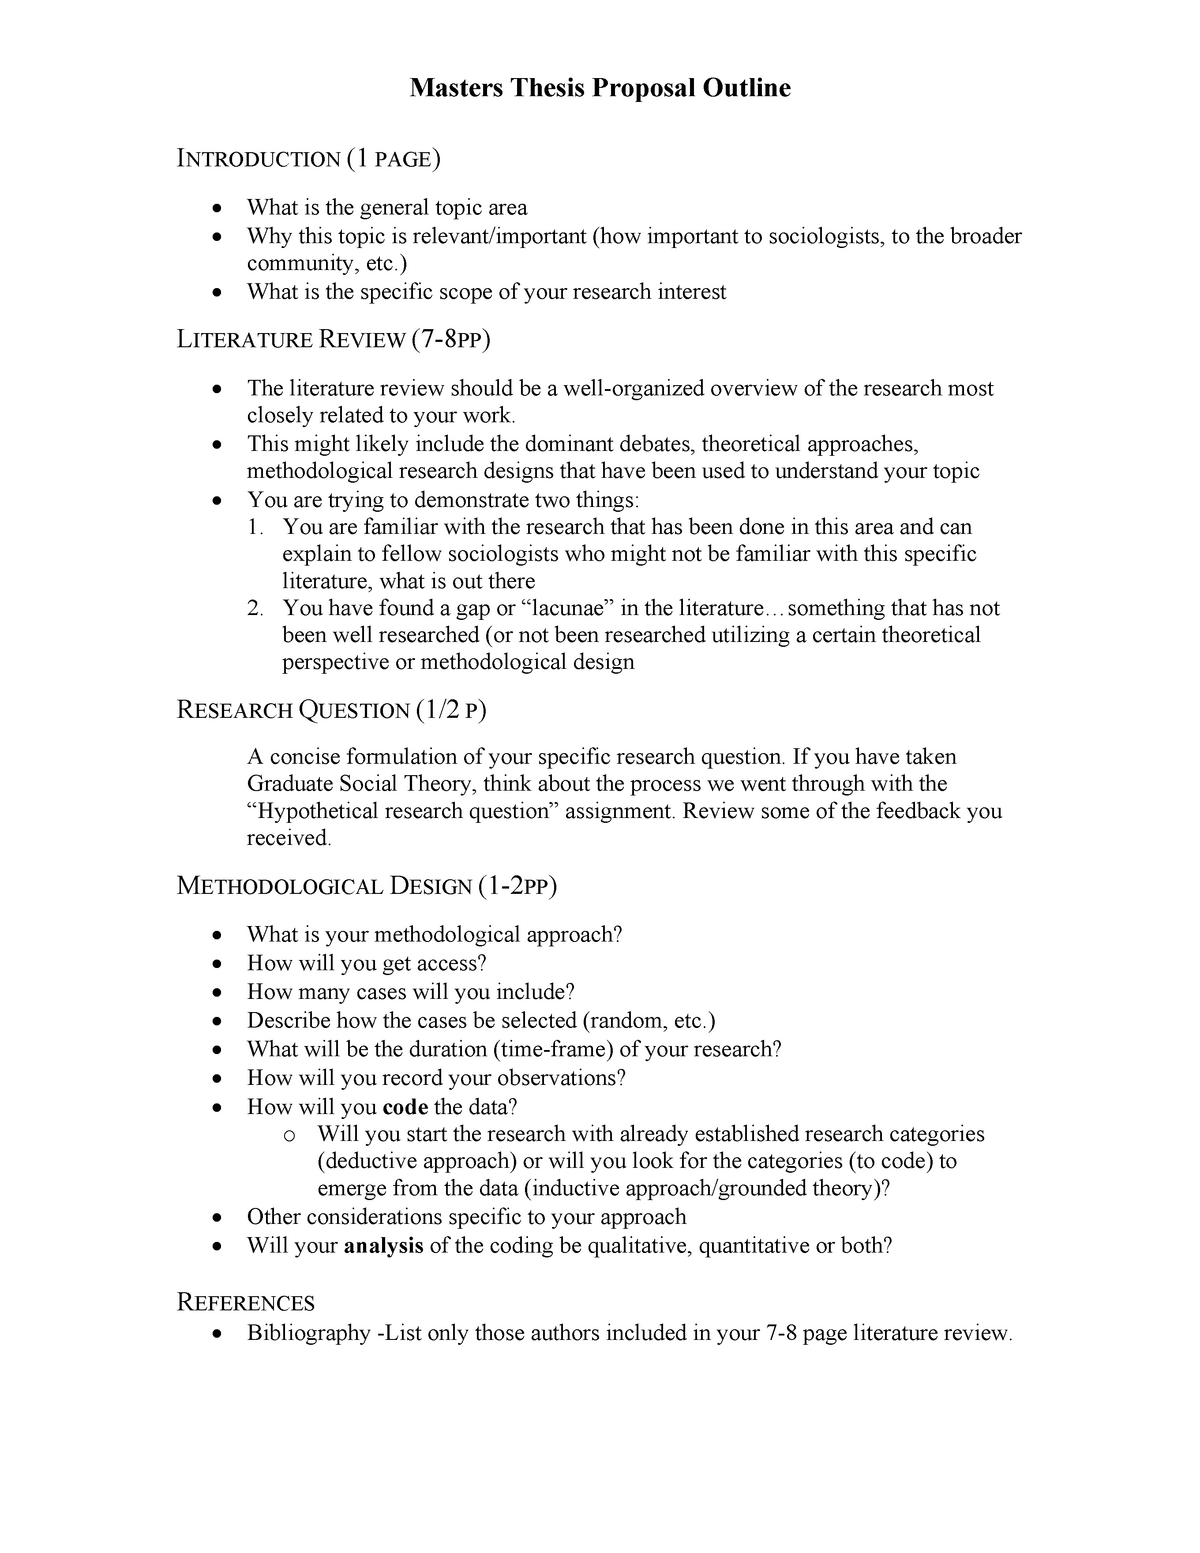 Master Thesis Outline Template - Masters Thesis Proposal Outline ...